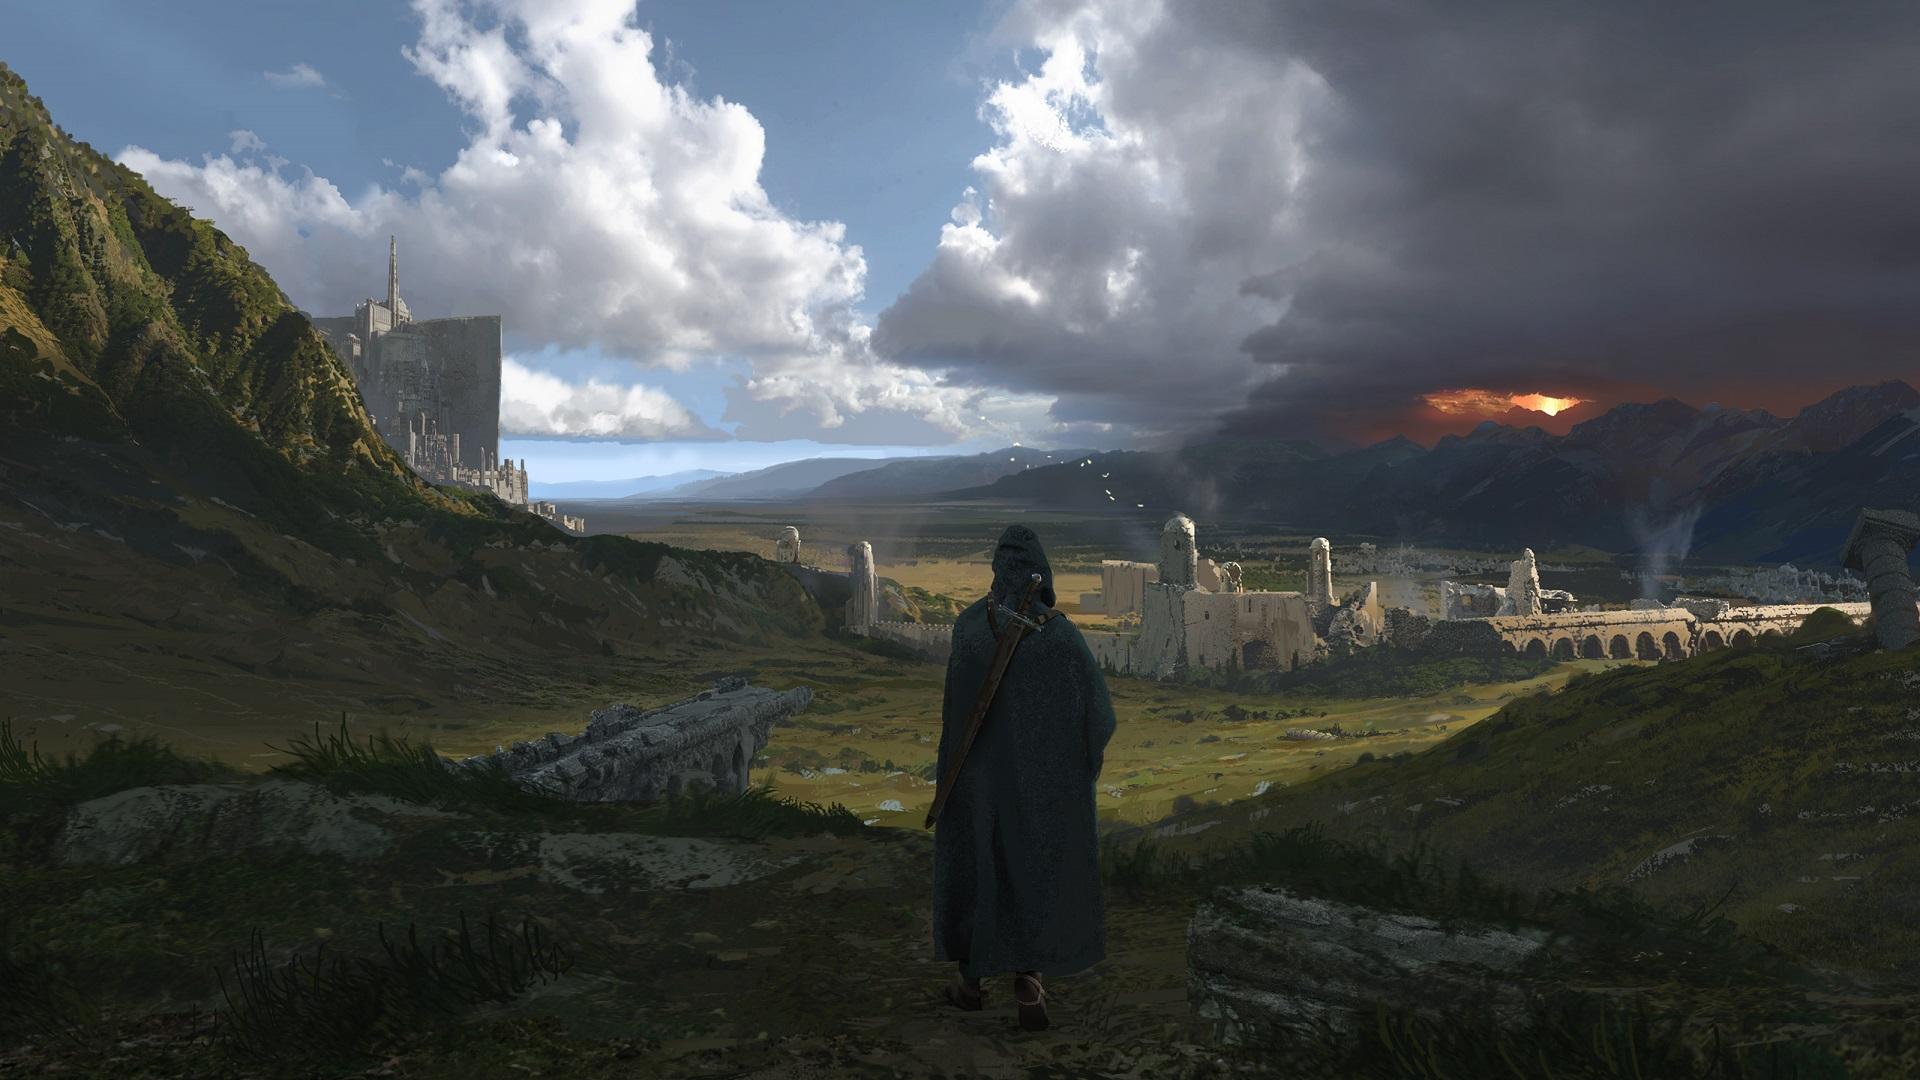 Lord of the Rings - Minas Tirith has a pretty good view